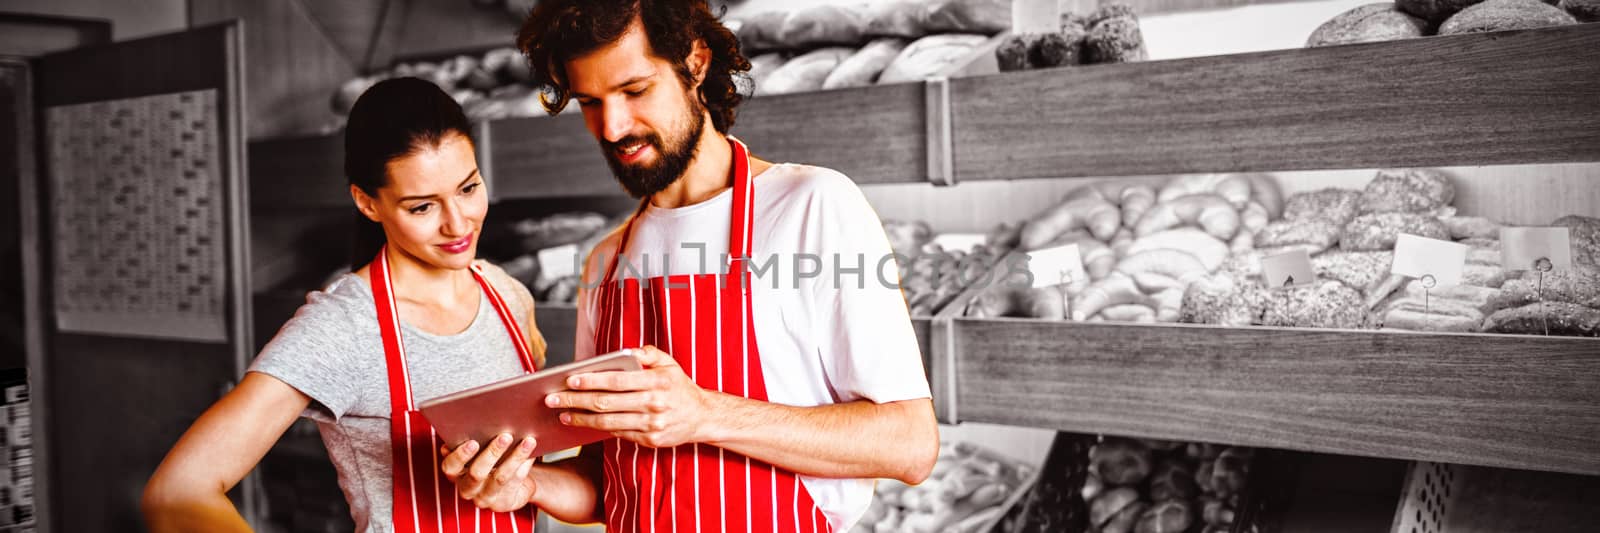 Couple using digital tablet in bakery shop